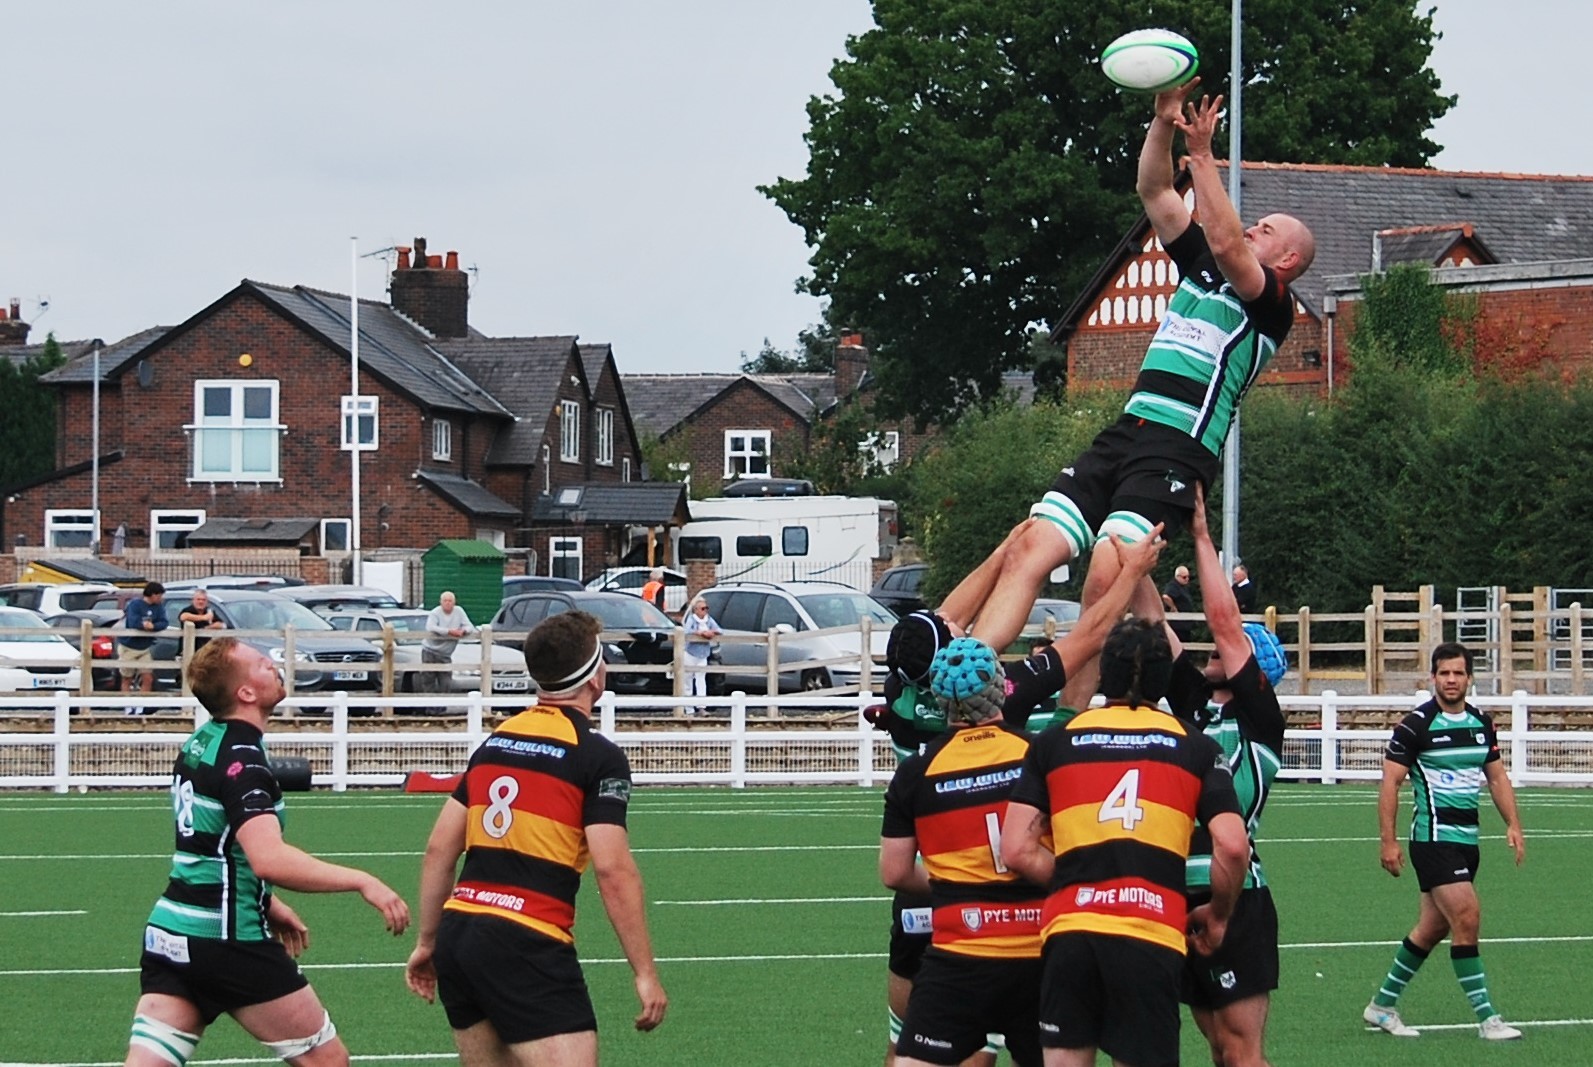 Action from Lymms 49-7 win over Kirkby Lonsdale on Saturday